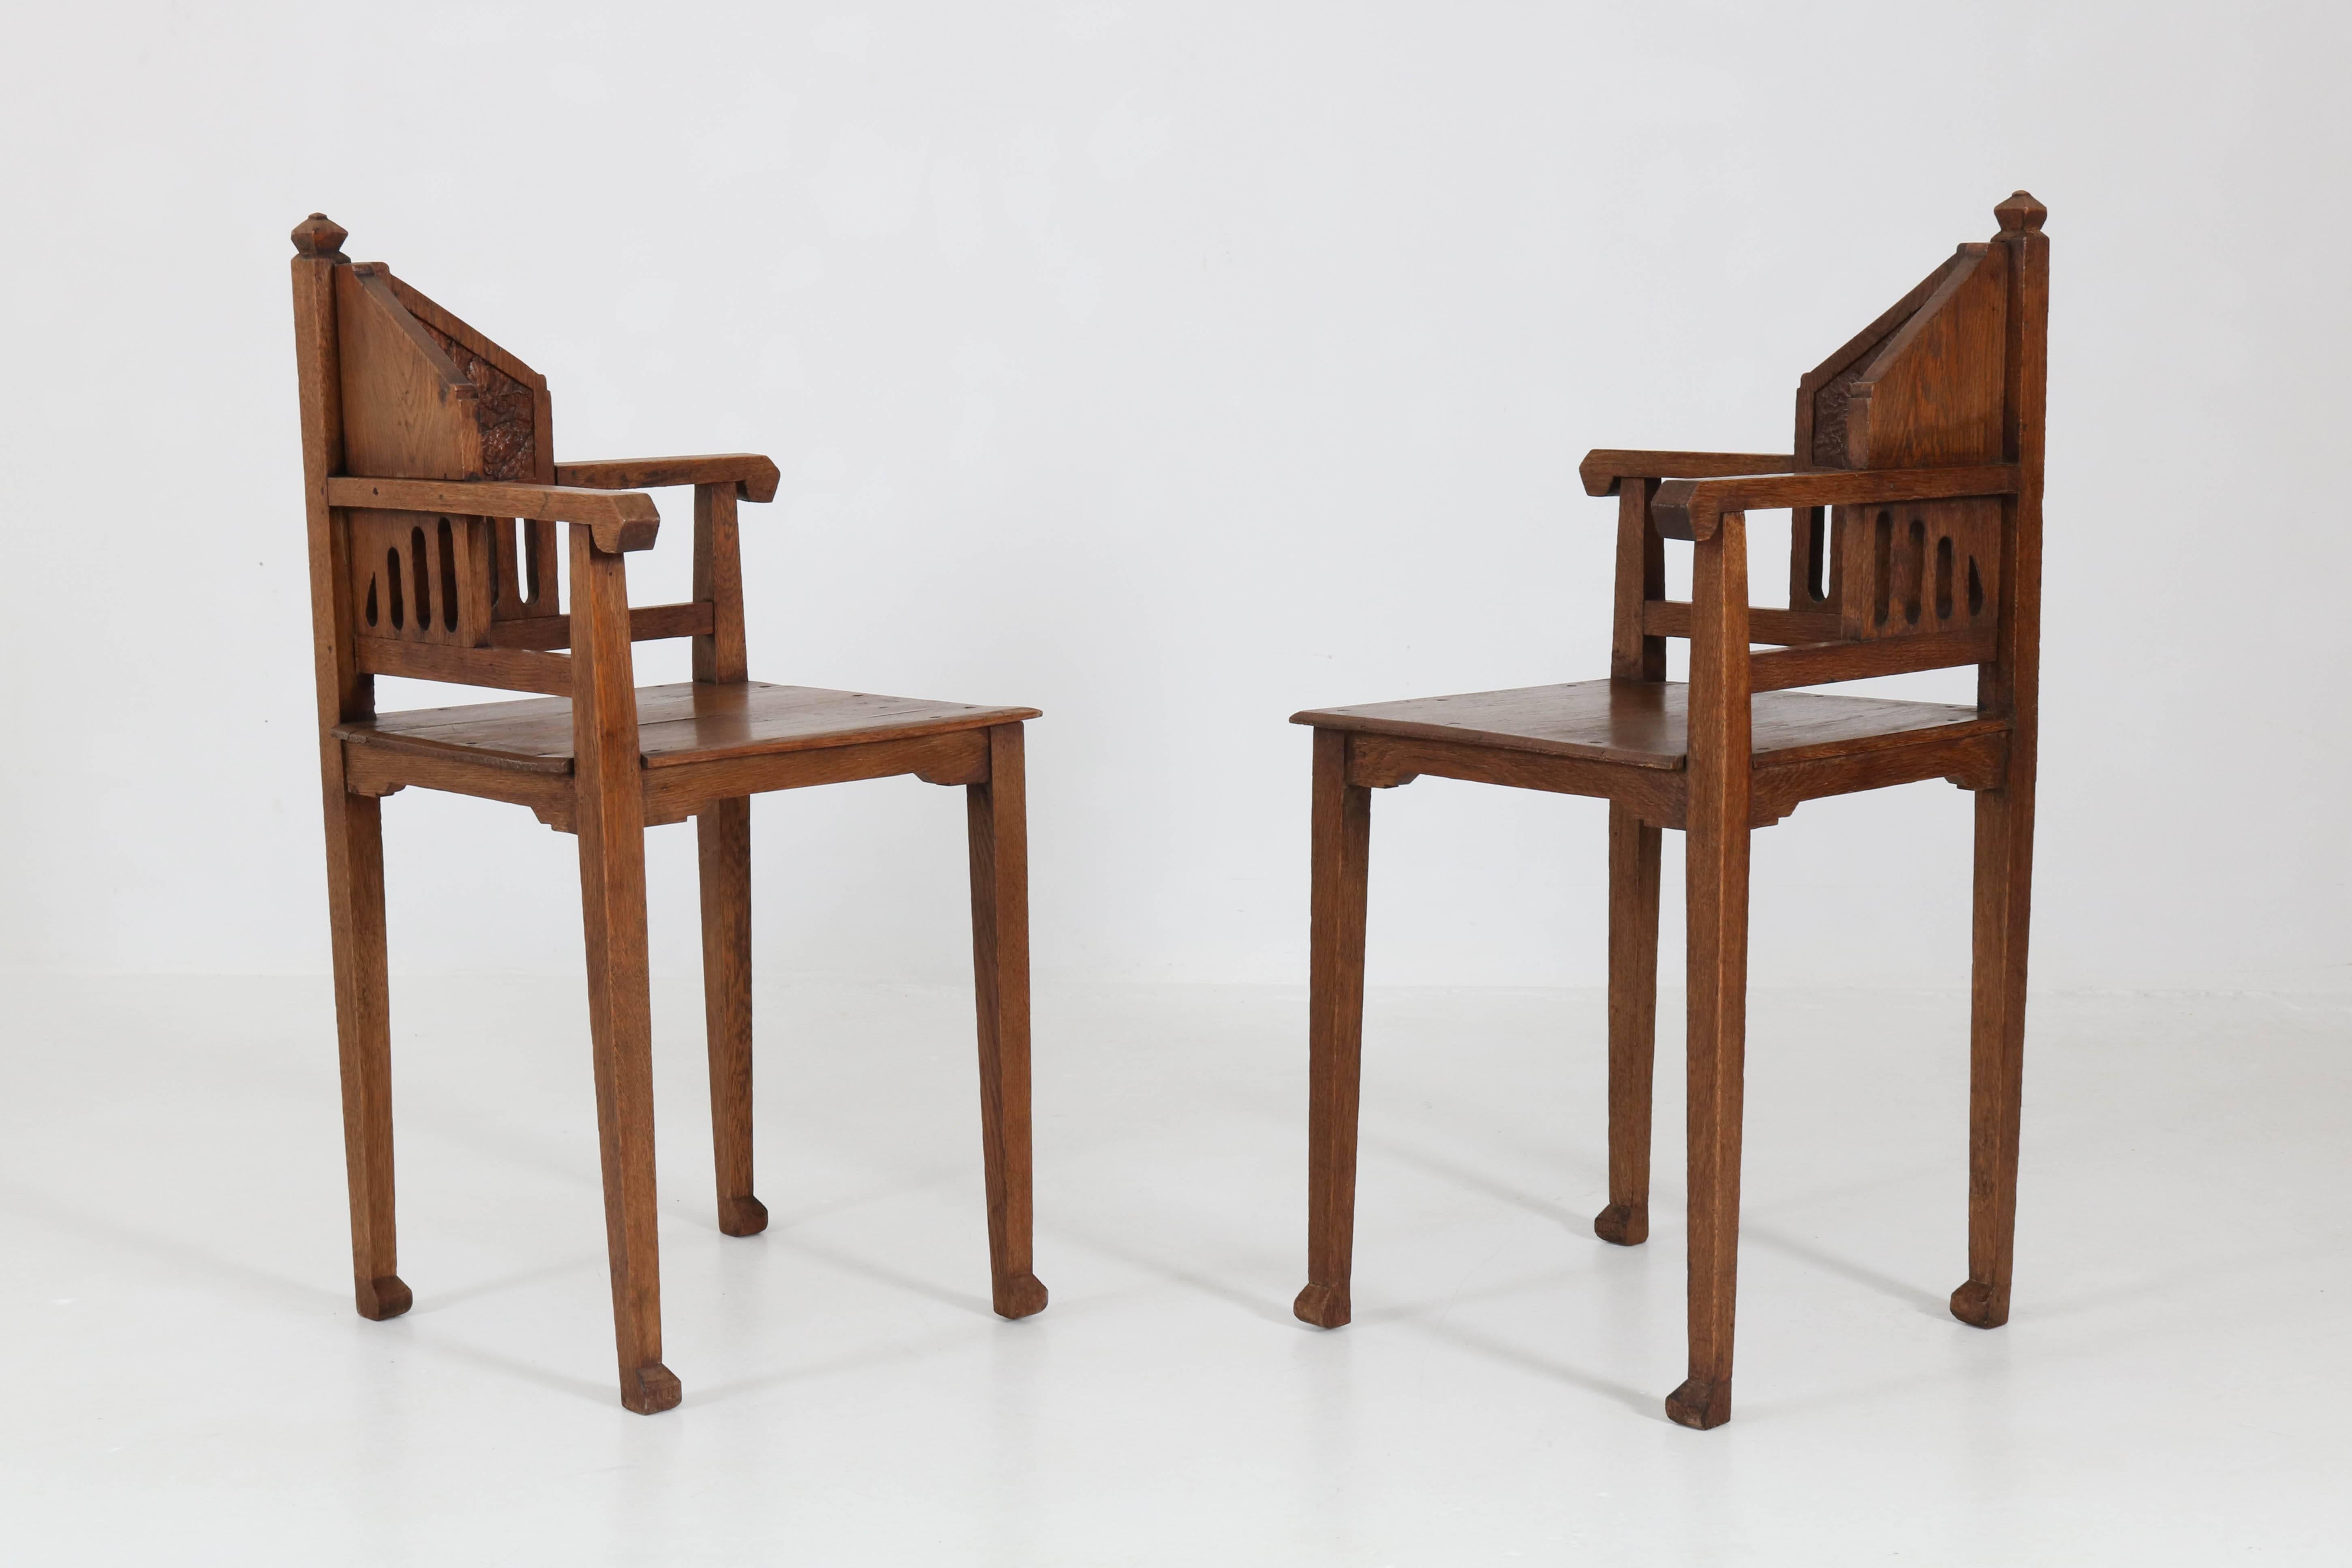 Elegant and rare pair of Dutch Arts & Crafts Art Nouveau corner chairs, 1900s.
Solid oak with nicely carved decoration.
In good original condition with minor wear consistent with age and use,
preserving a beautiful patina.
  